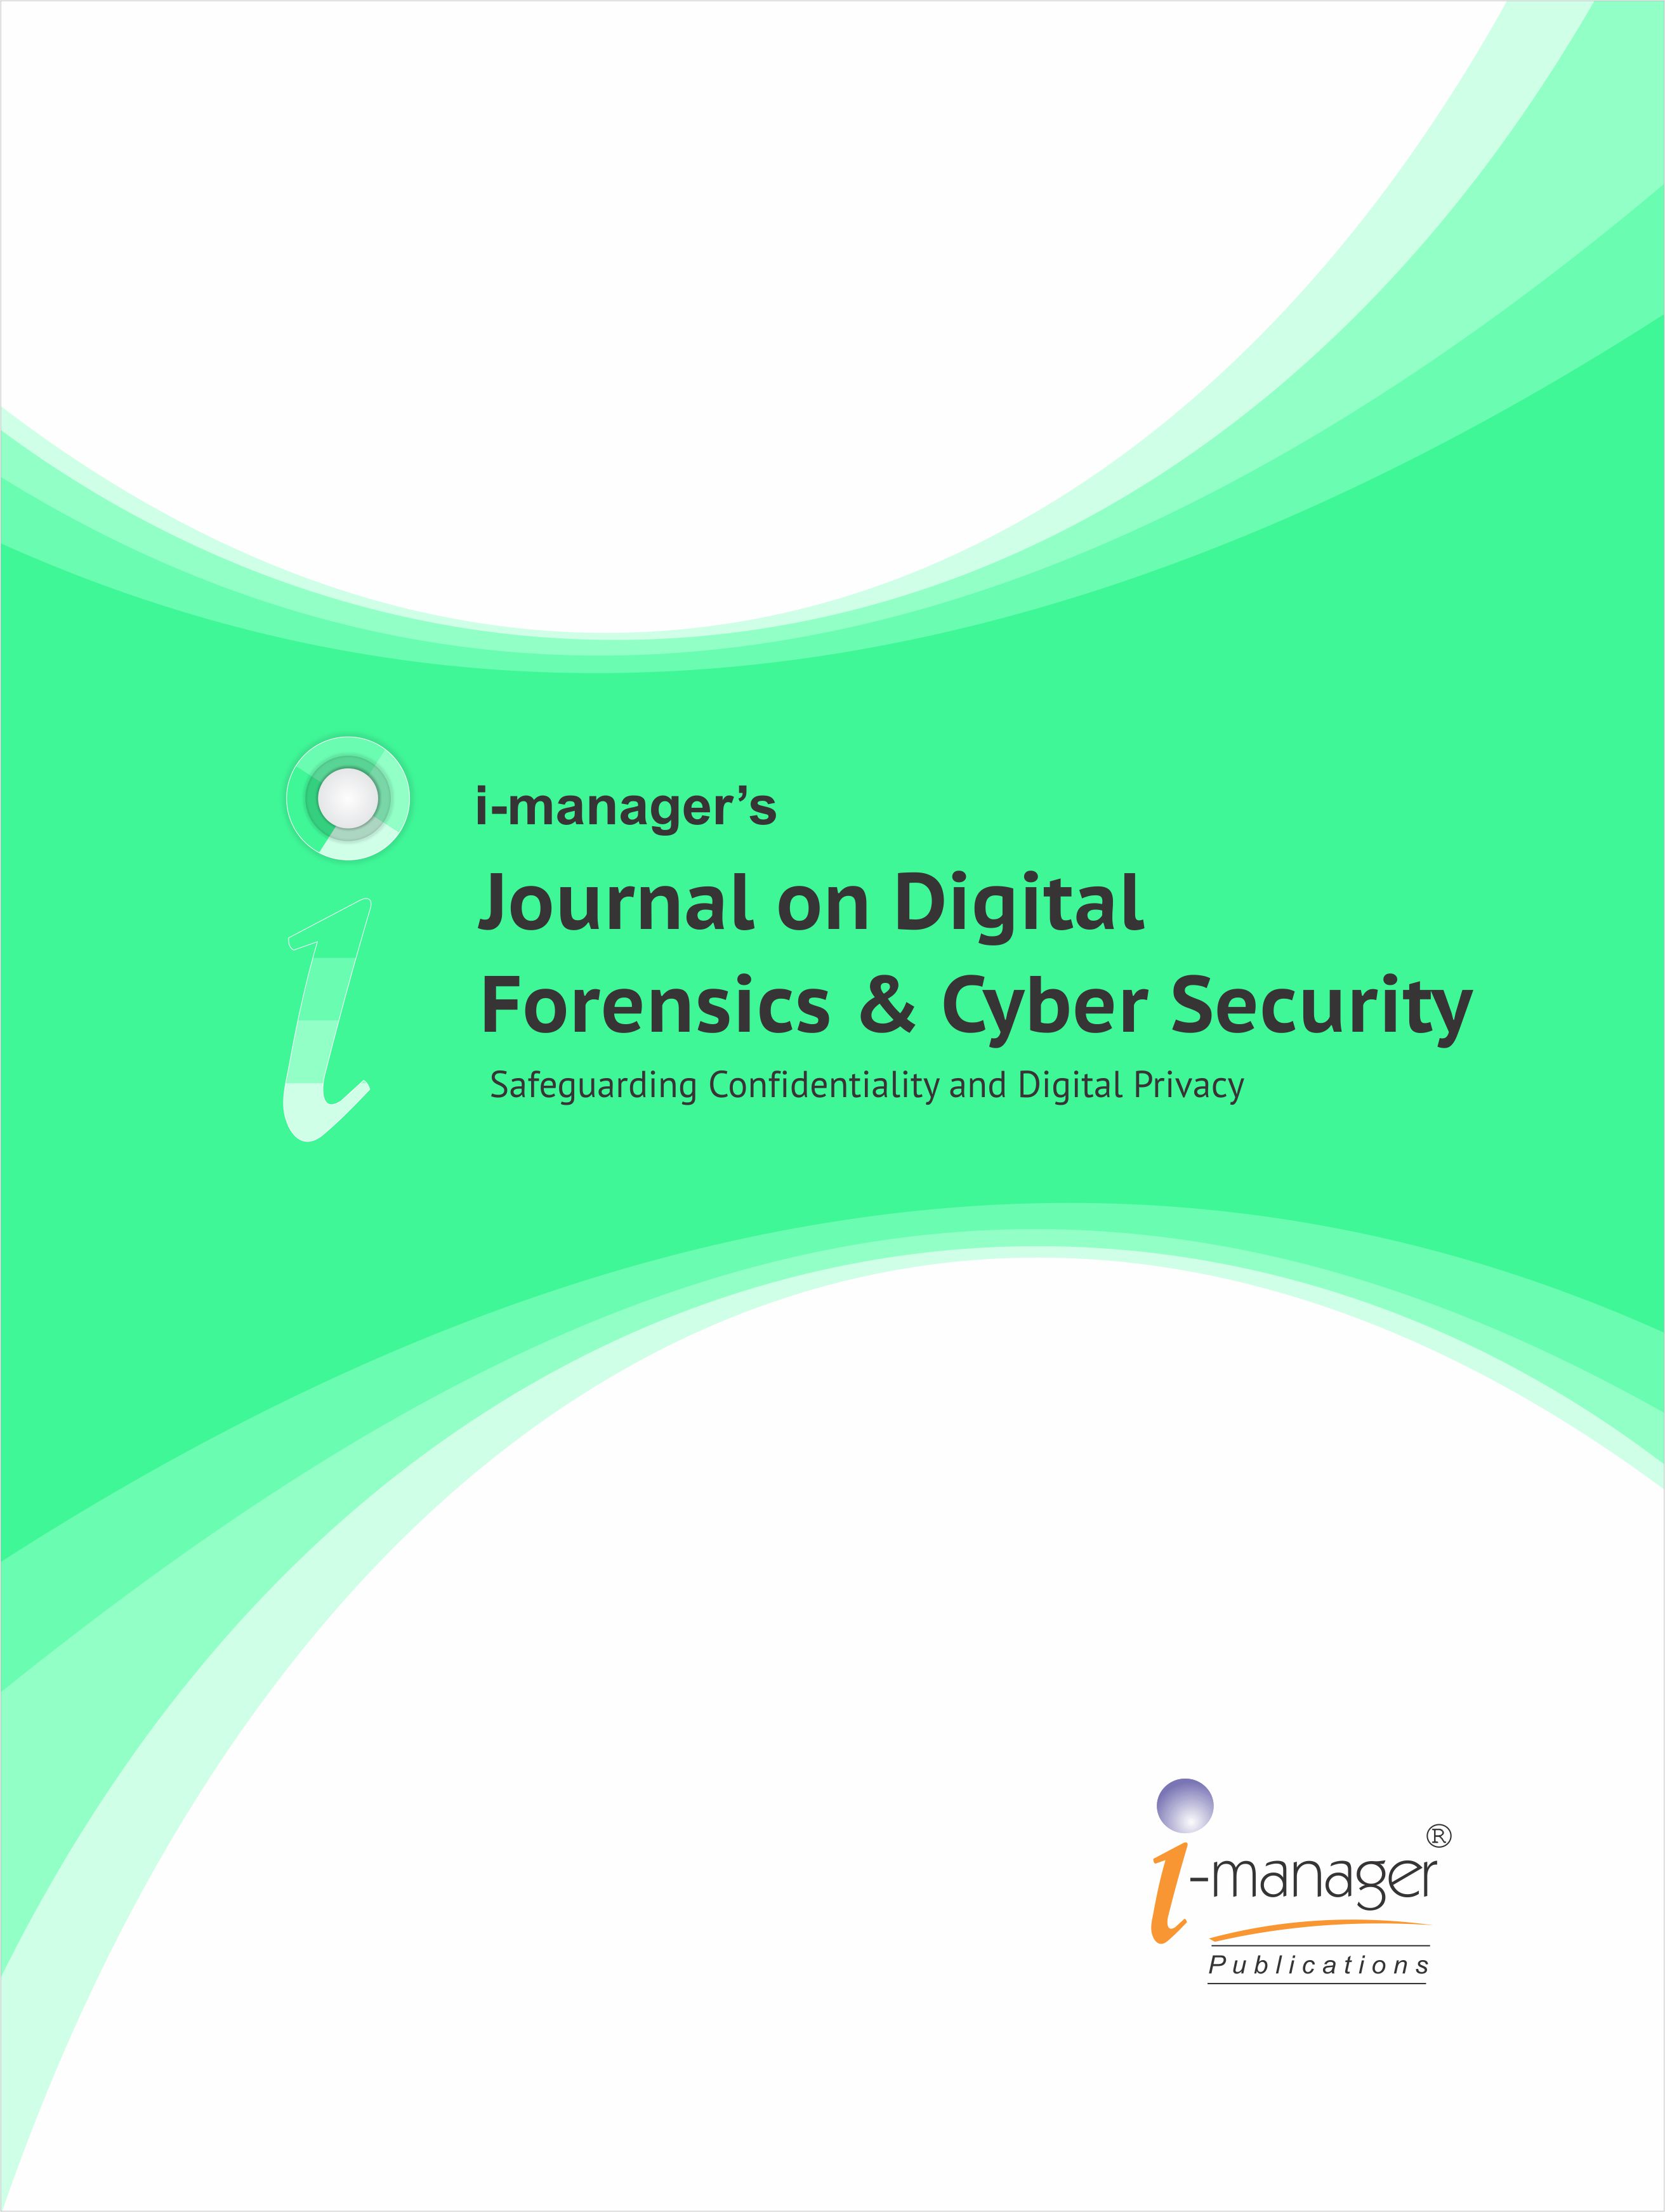 Journal on Digital Forensics & Cyber Security